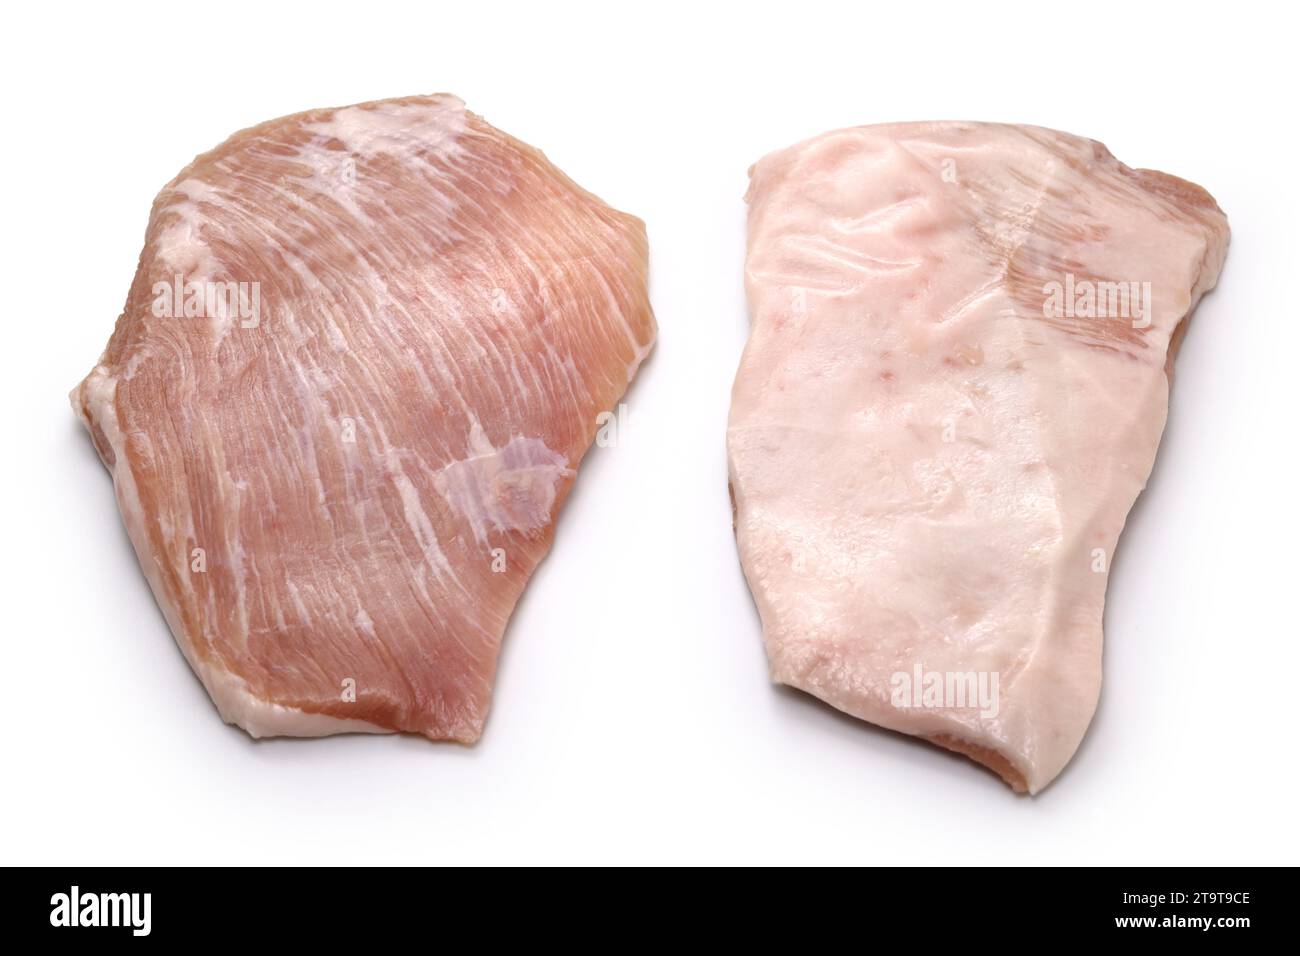 pork jowl meat isolated on a white background Stock Photo